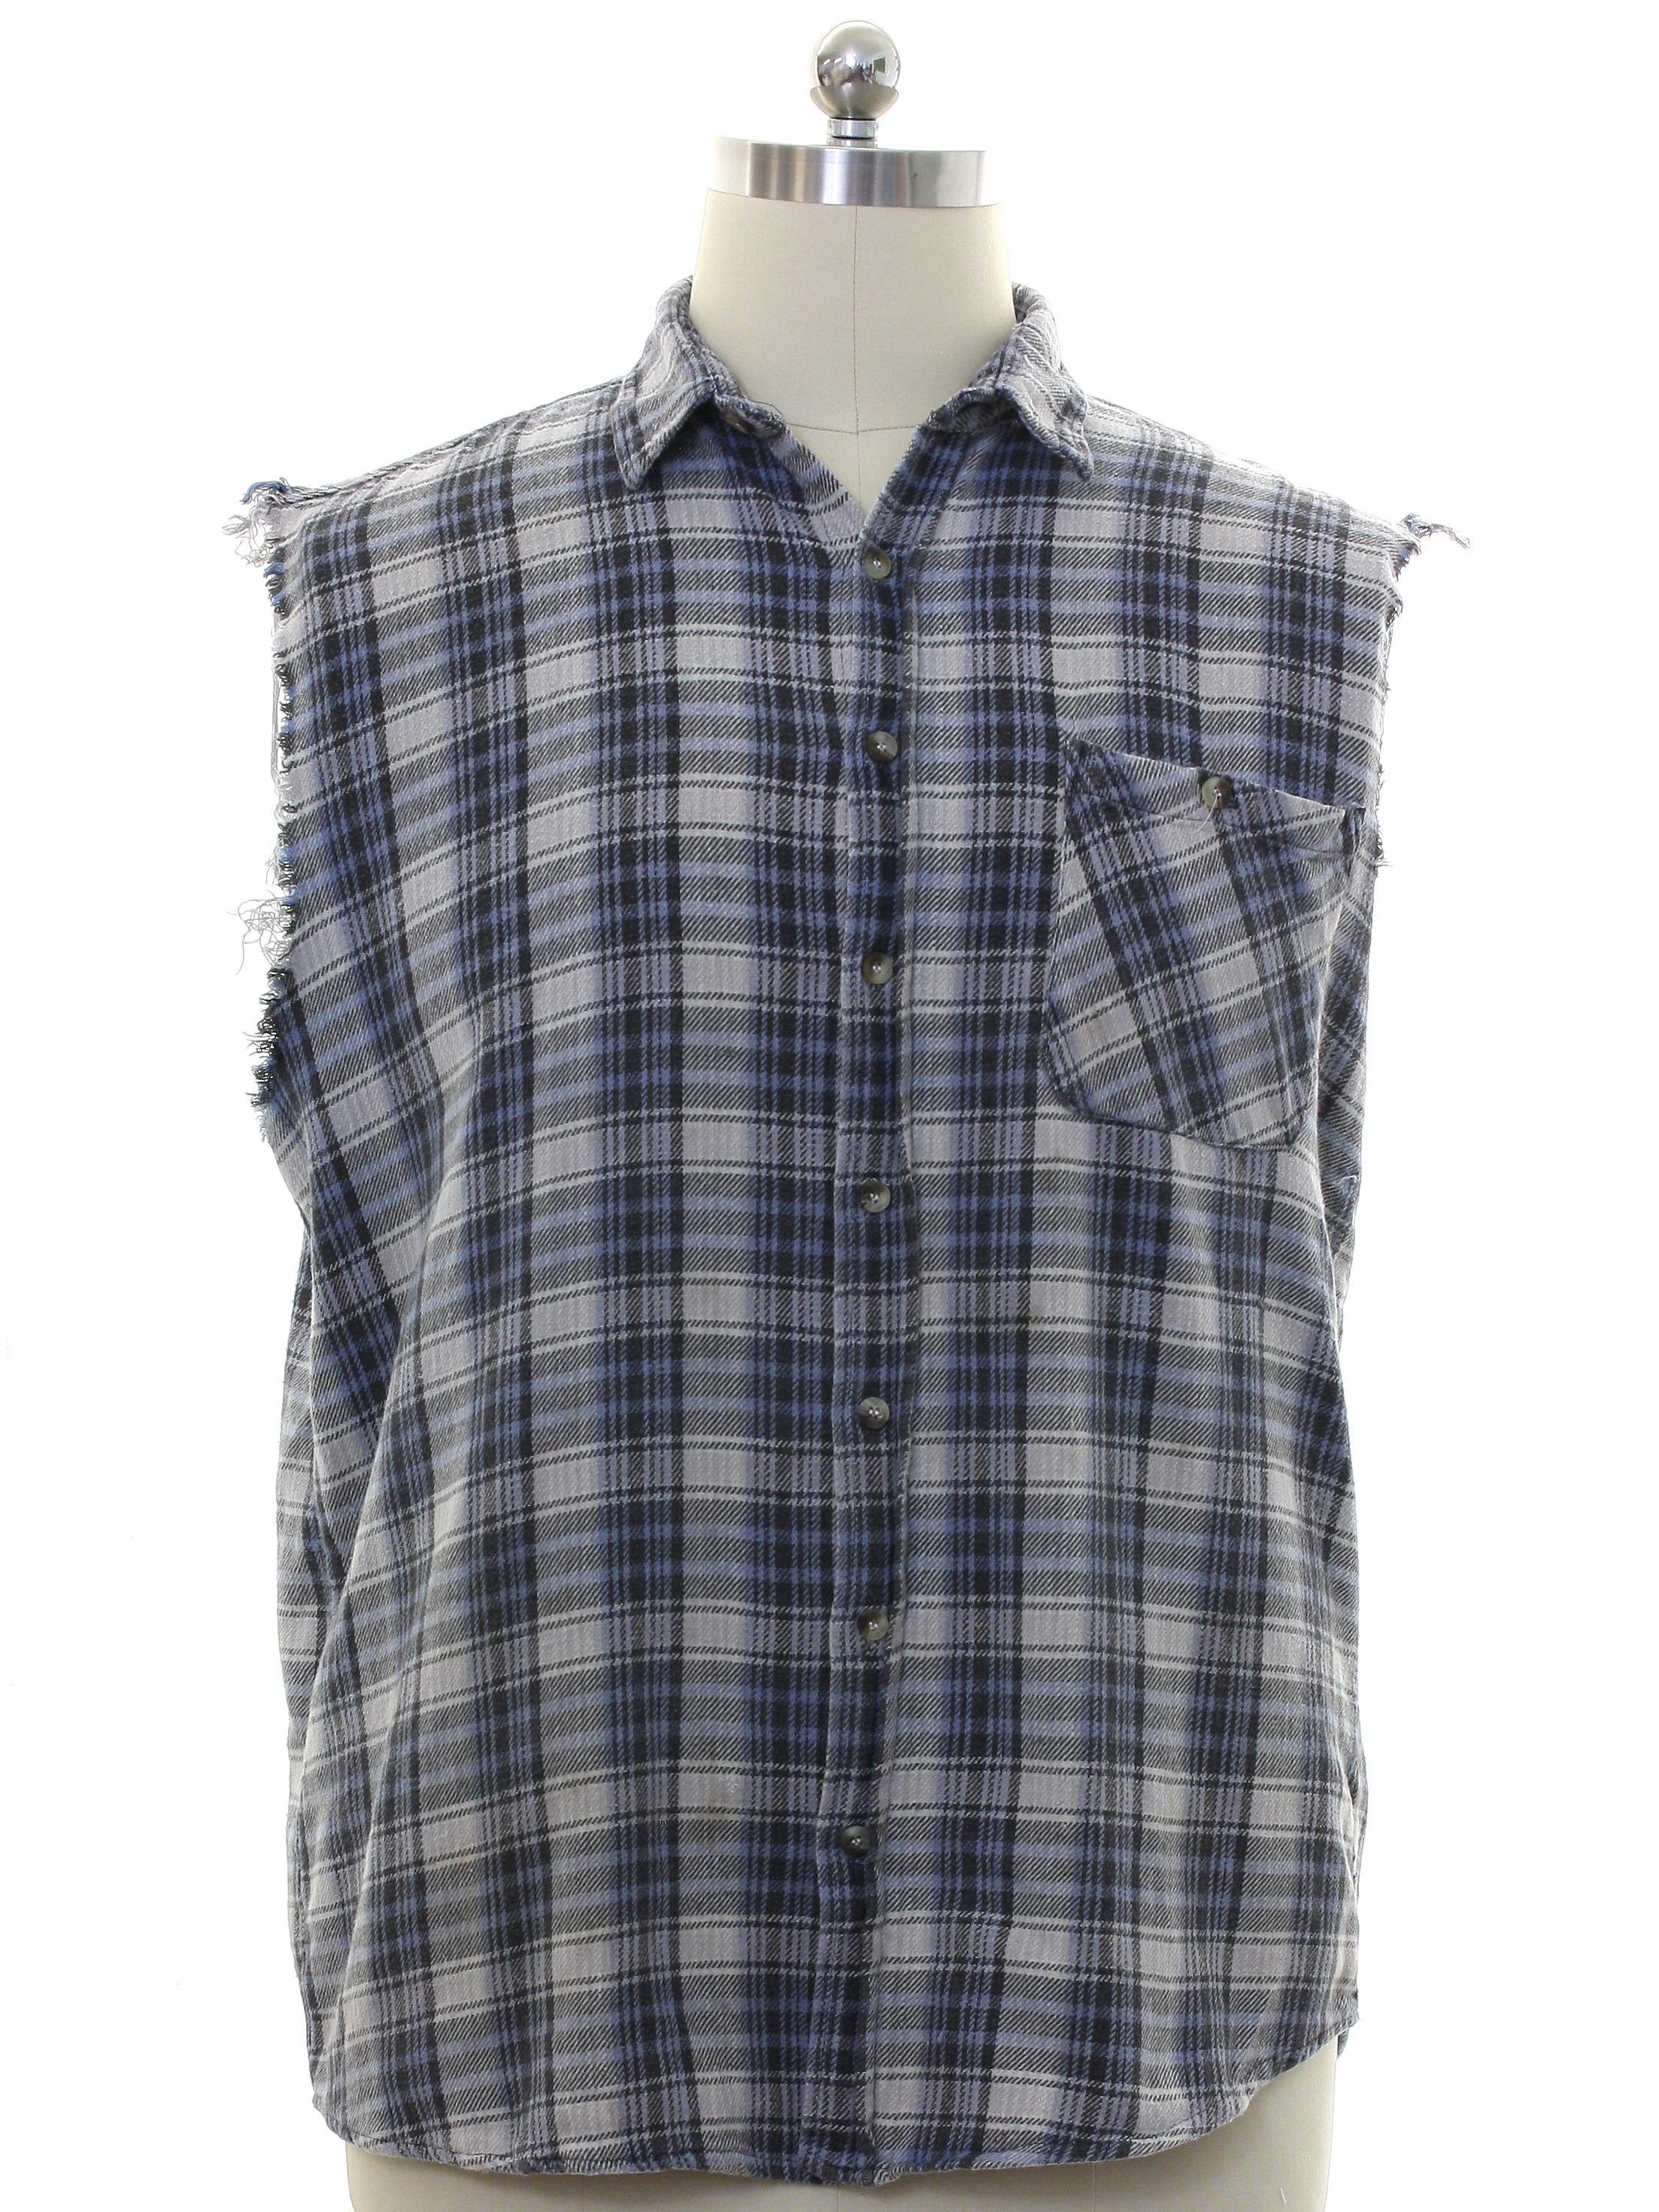 Sleeveless Shirt: 90s -Wilderness- Mens shades of gray and blue plaid ...